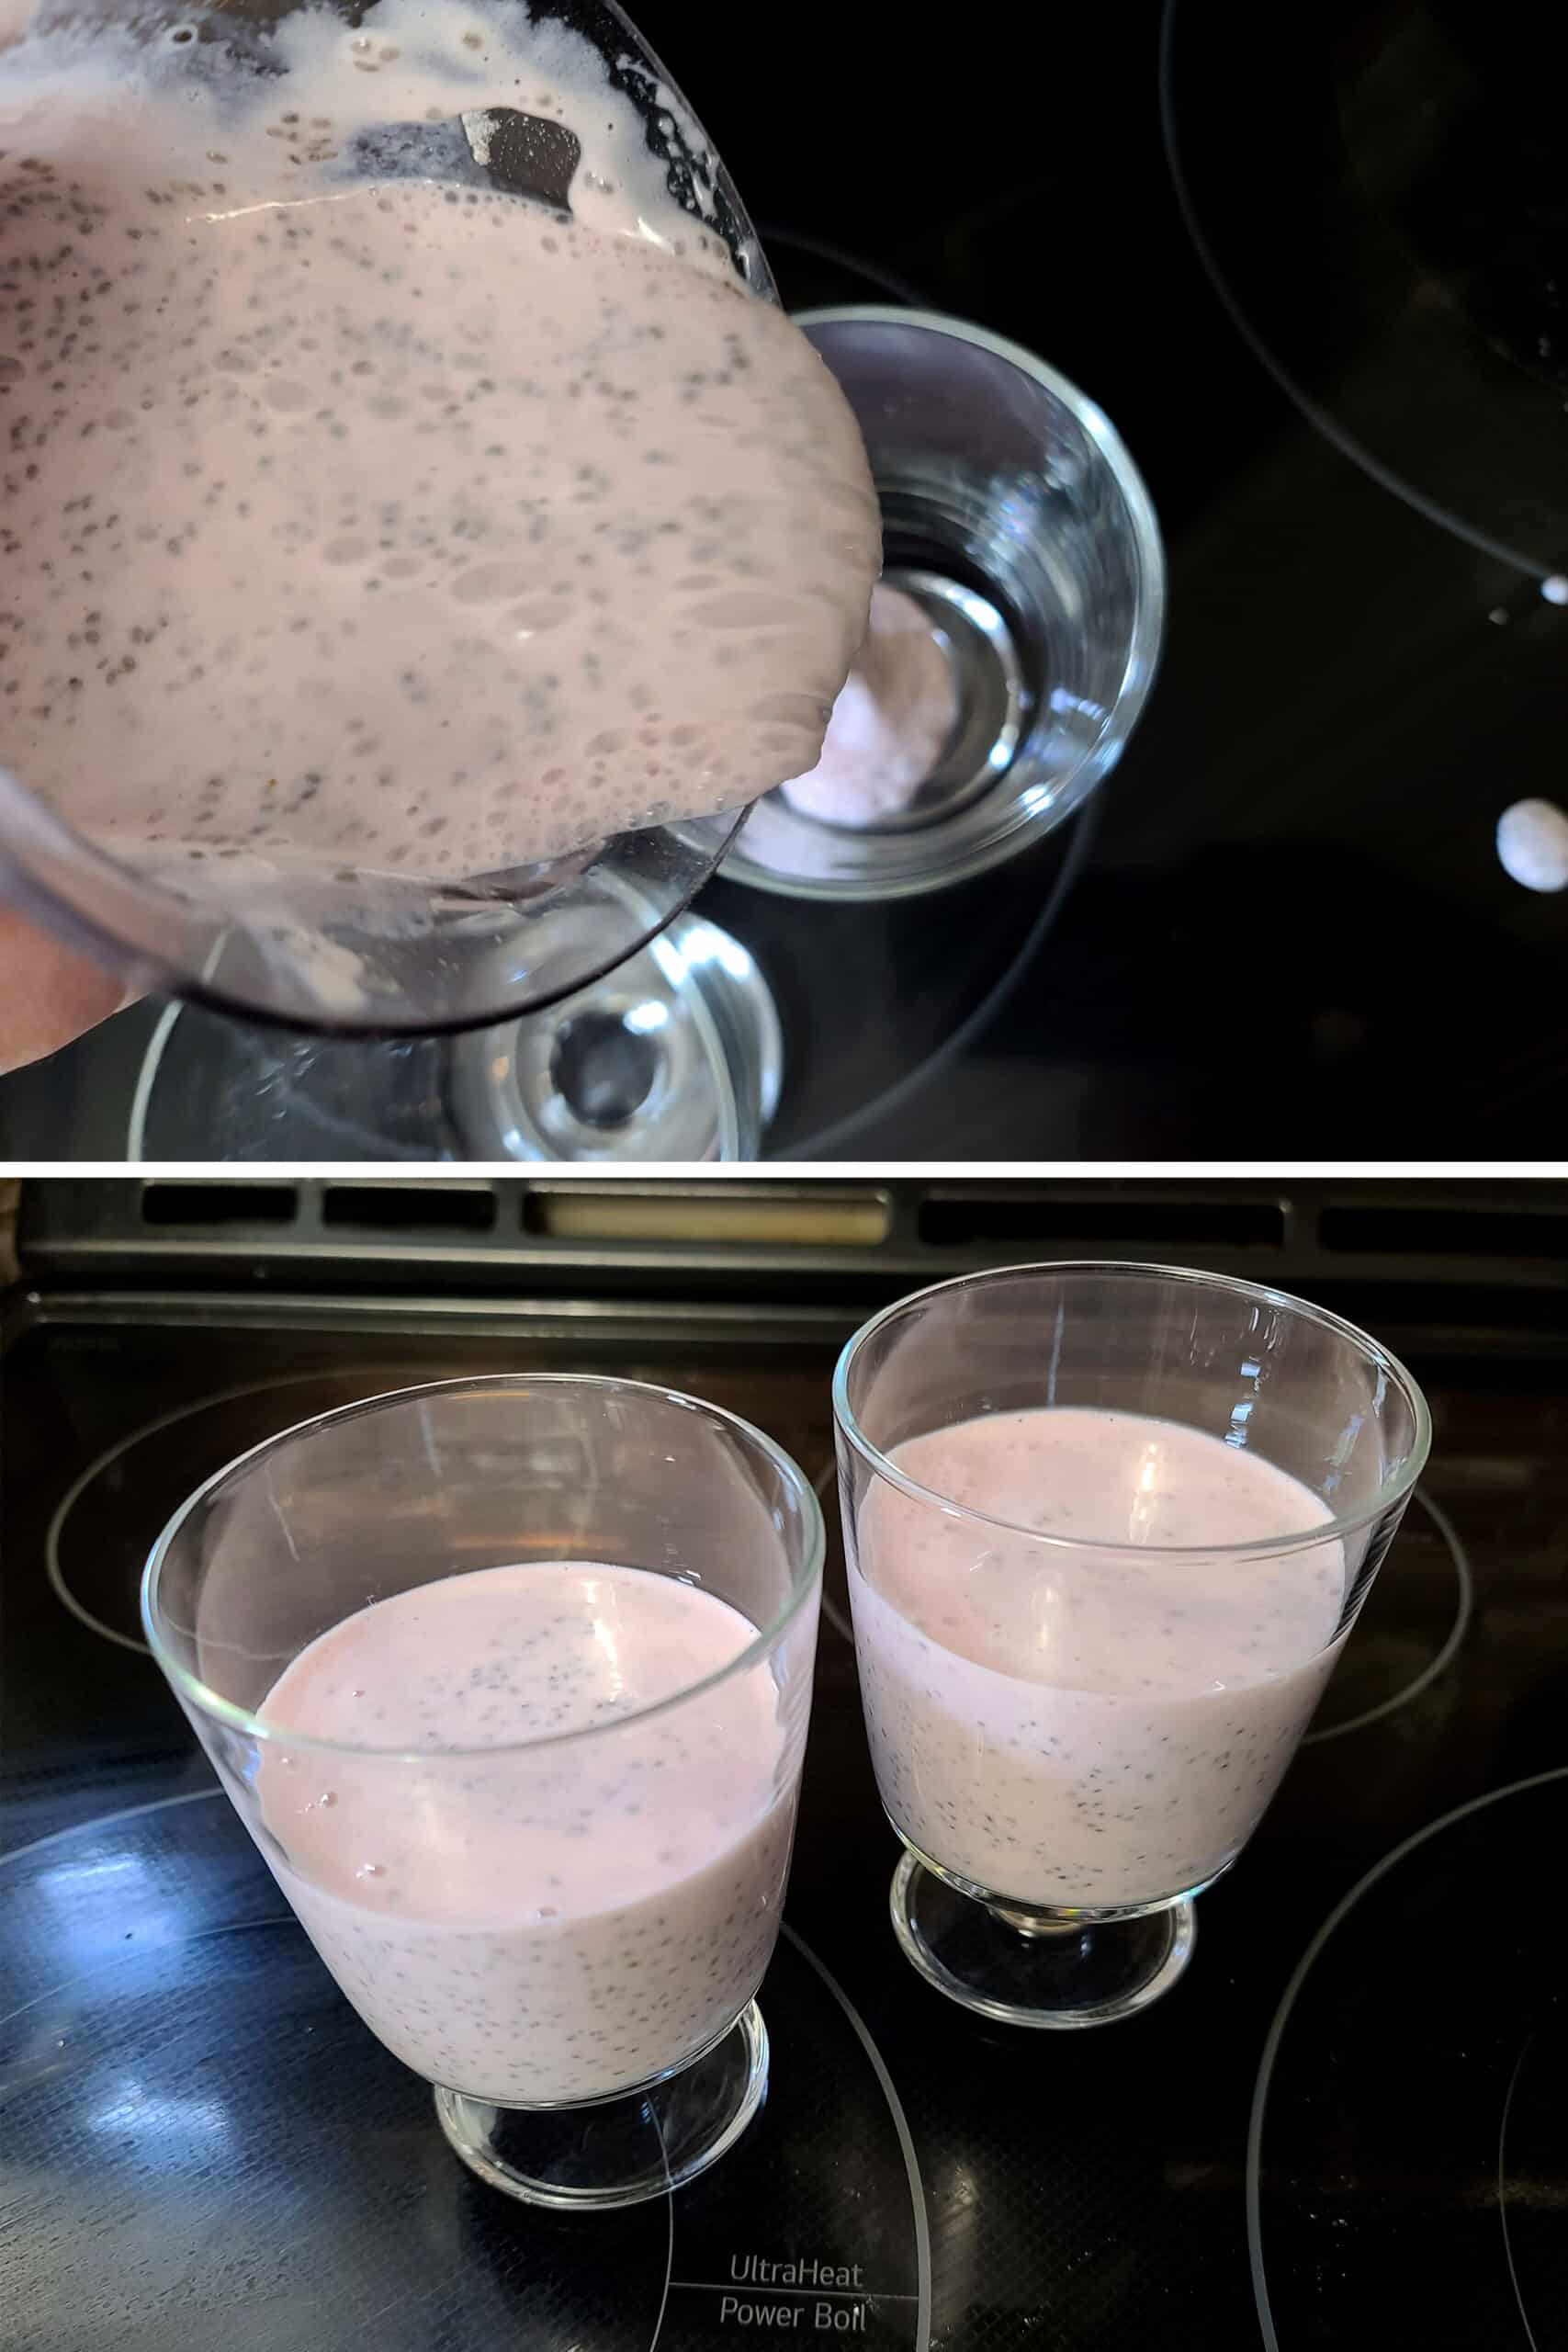 A 2 part image showing thickened protein pudding being poured into 2 glasses.